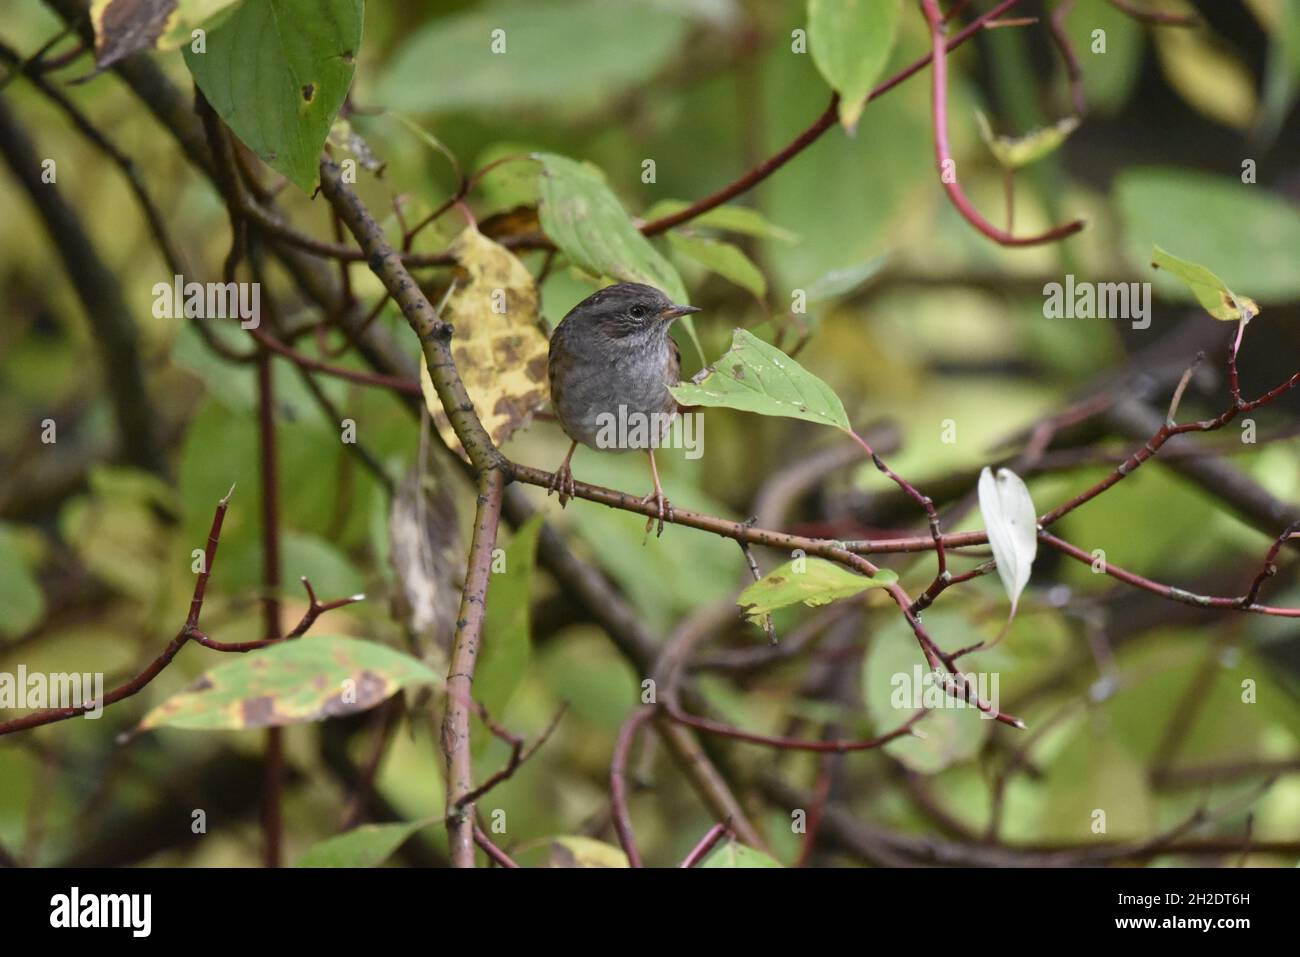 Close-Up Image of a Dunnock (Prunella modularis) Facing Camera While Perched on Twigs Against an Autumn Leafy Background in England, UK Stock Photo